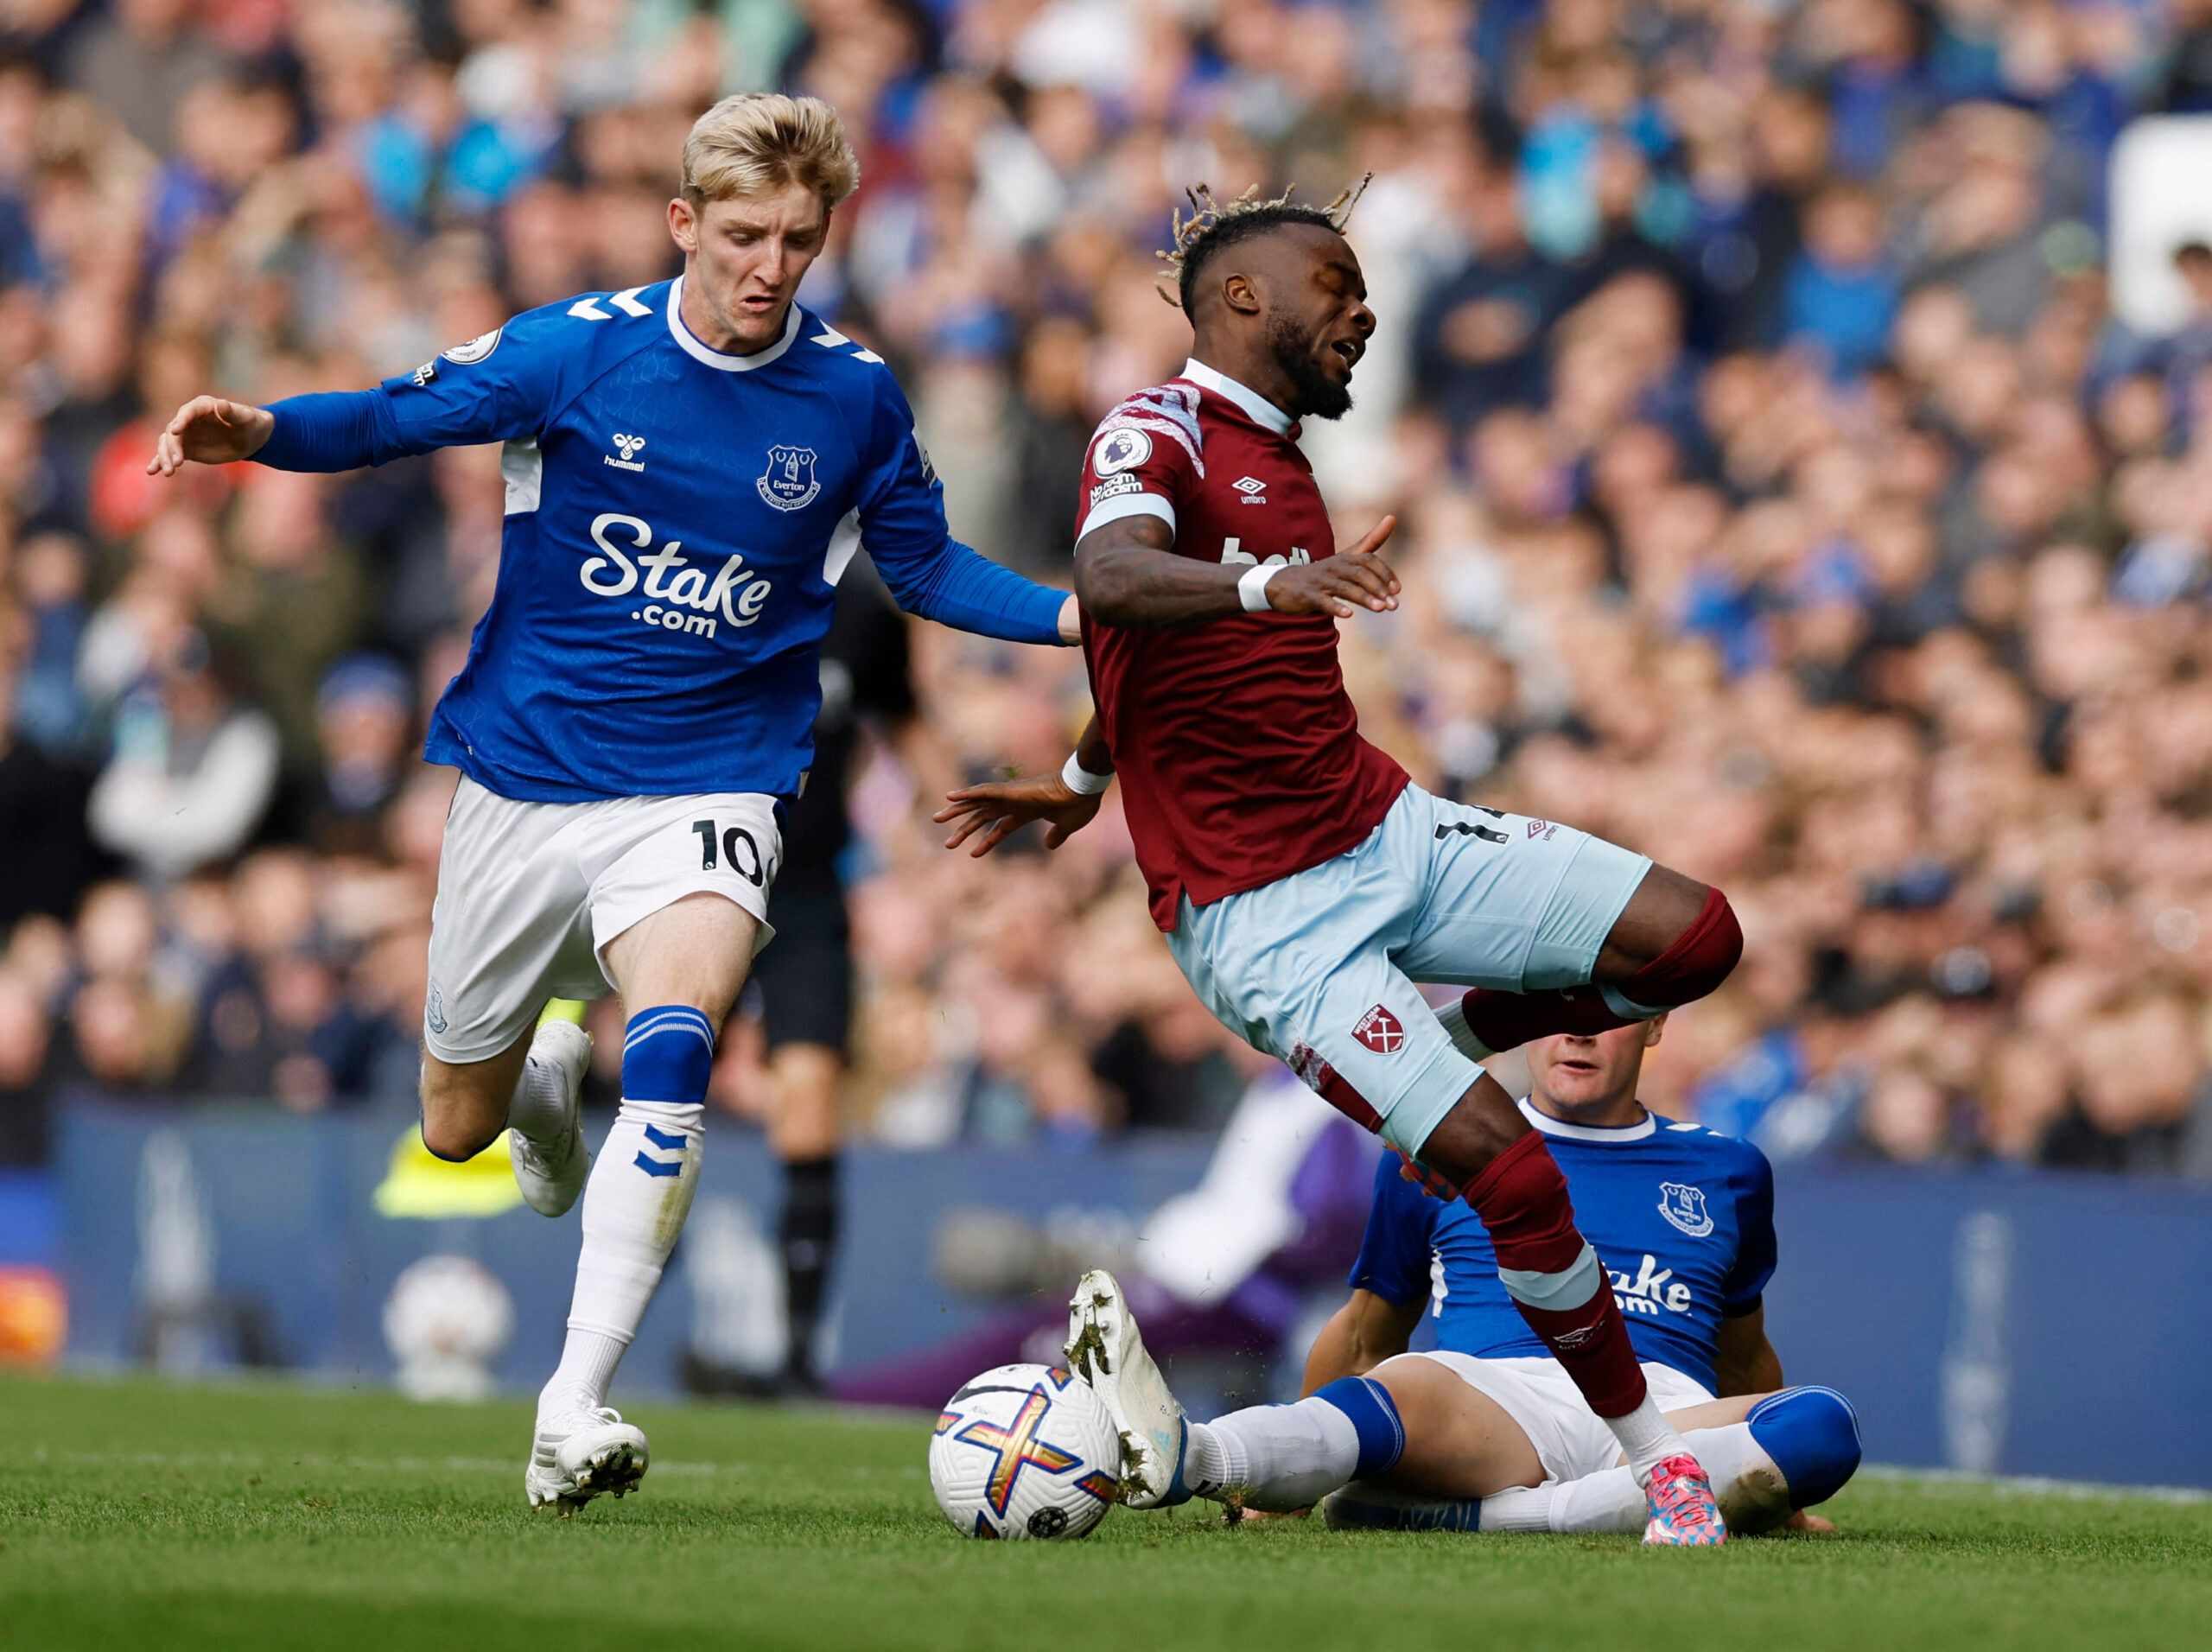 Soccer Football - Premier League - Everton v West Ham United - Goodison Park, Liverpool, Britain - September 18, 2022 Everton's Anthony Gordon fouls West Ham United's Maxwel Cornet before receiving a yellow card Action Images via Reuters/Jason Cairnduff EDITORIAL USE ONLY. No use with unauthorized audio, video, data, fixture lists, club/league logos or 'live' services. Online in-match use limited to 75 images, no video emulation. No use in betting, games or single club /league/player publication